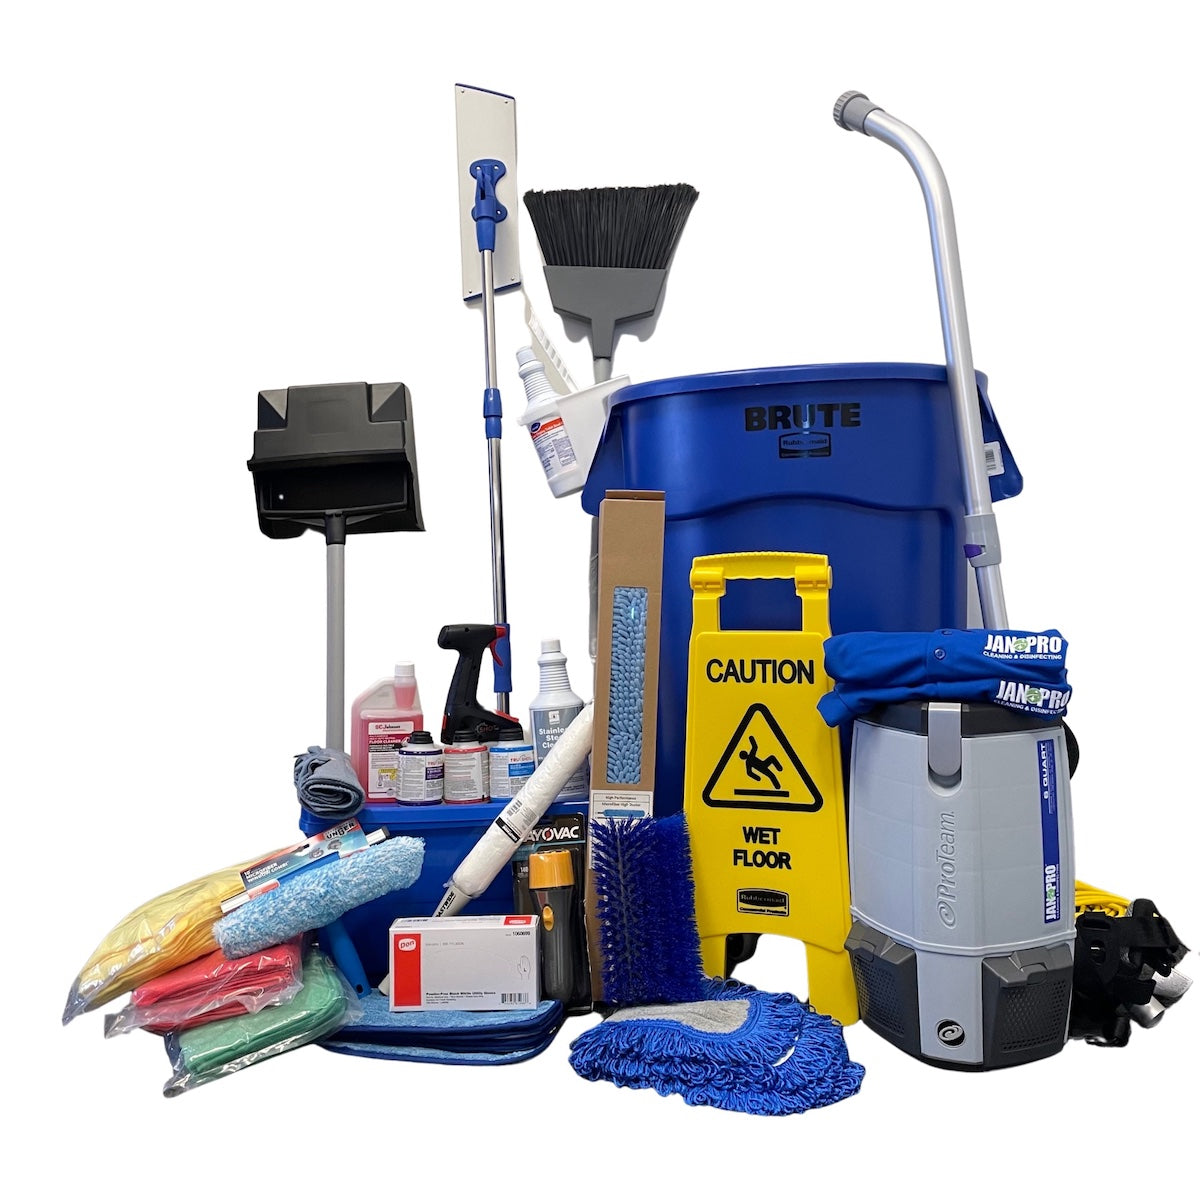 Janitorial & Commercial Cleaning Supplies